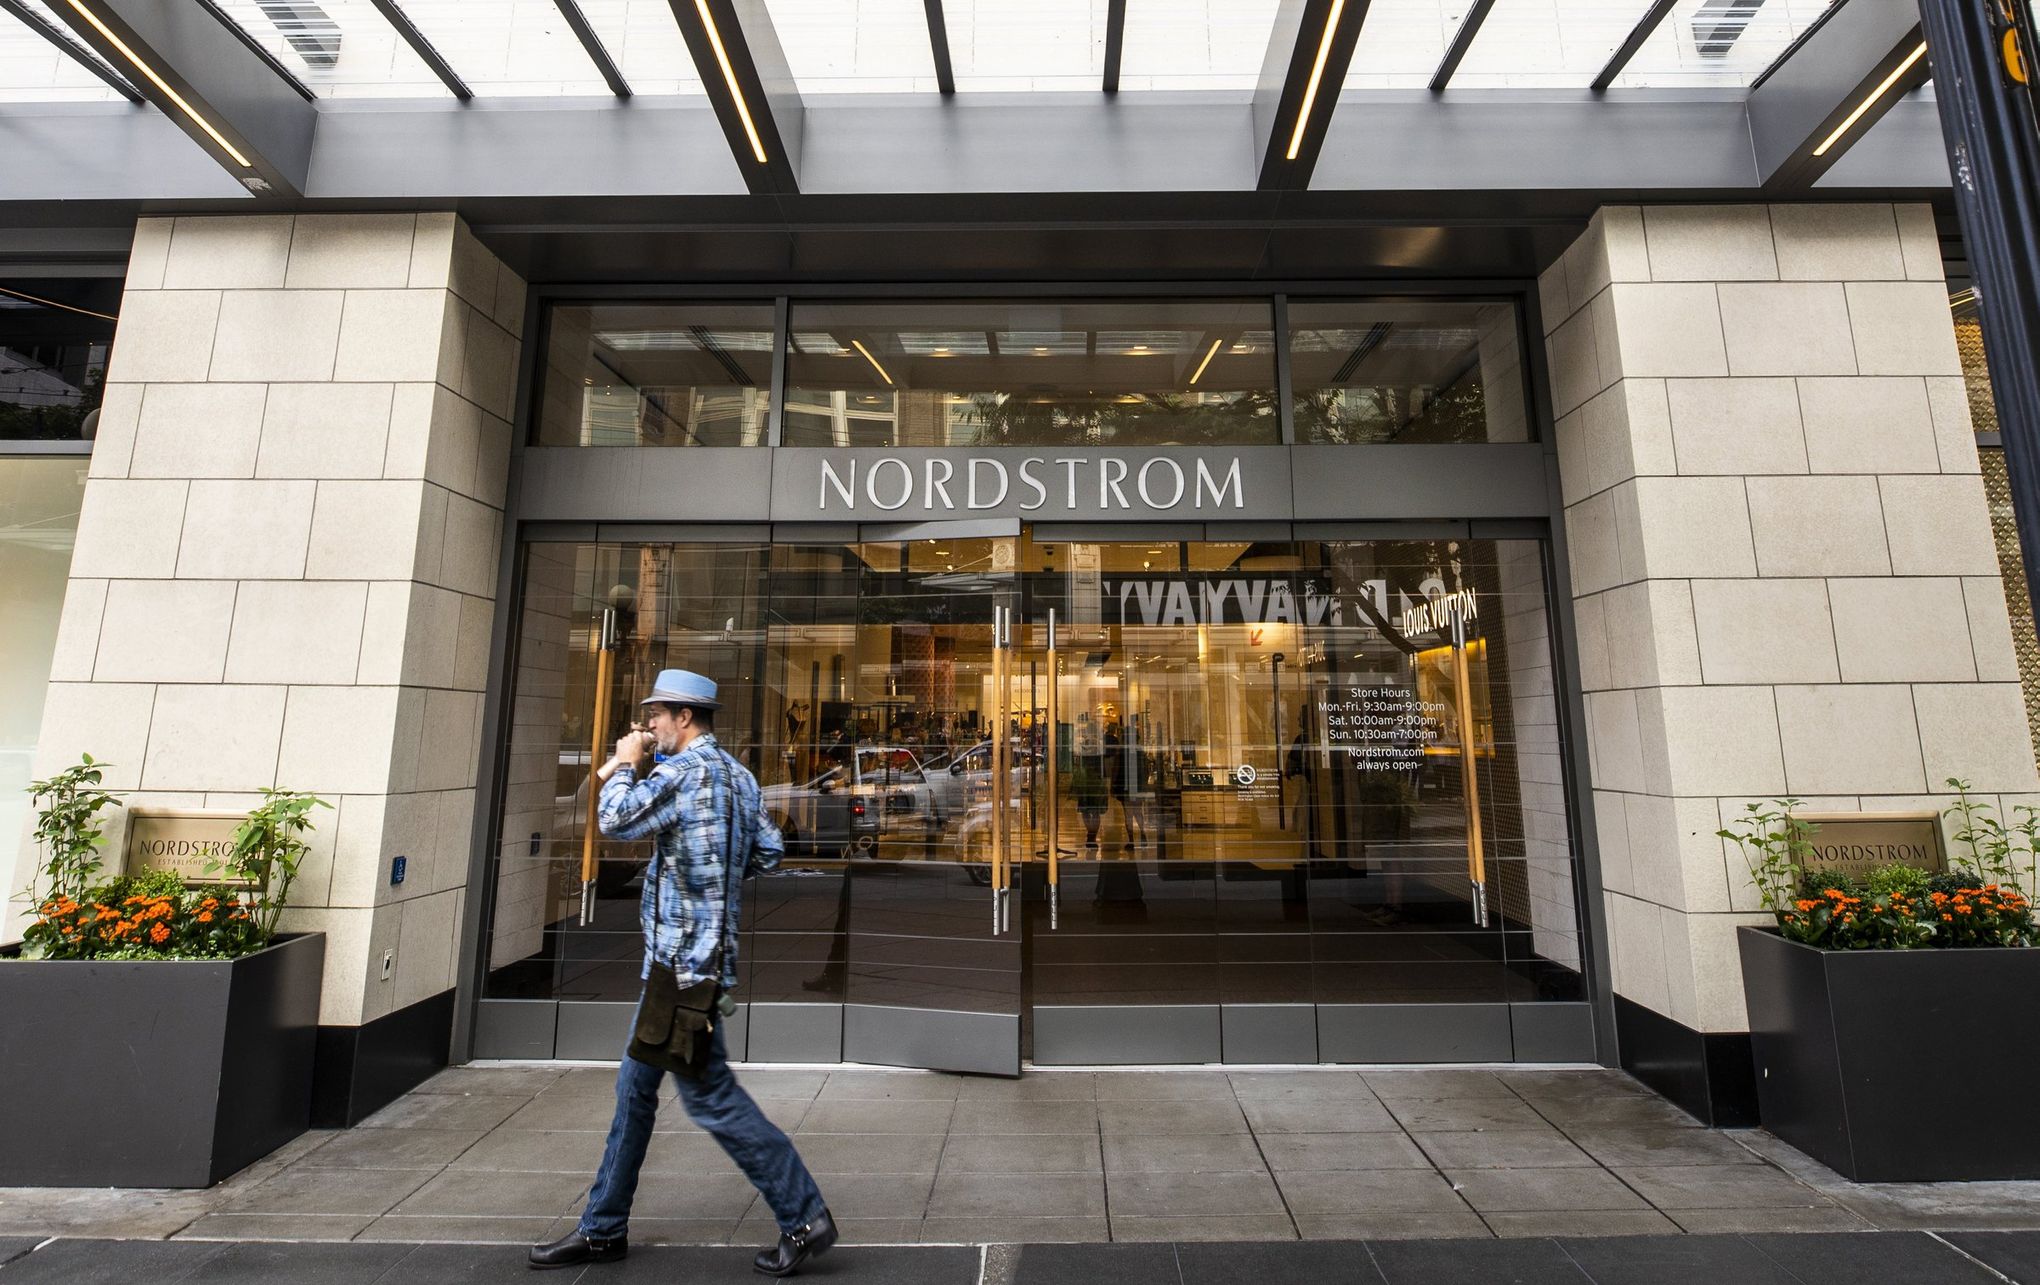 Louis Vuitton Seattle Nordstrom store, United States